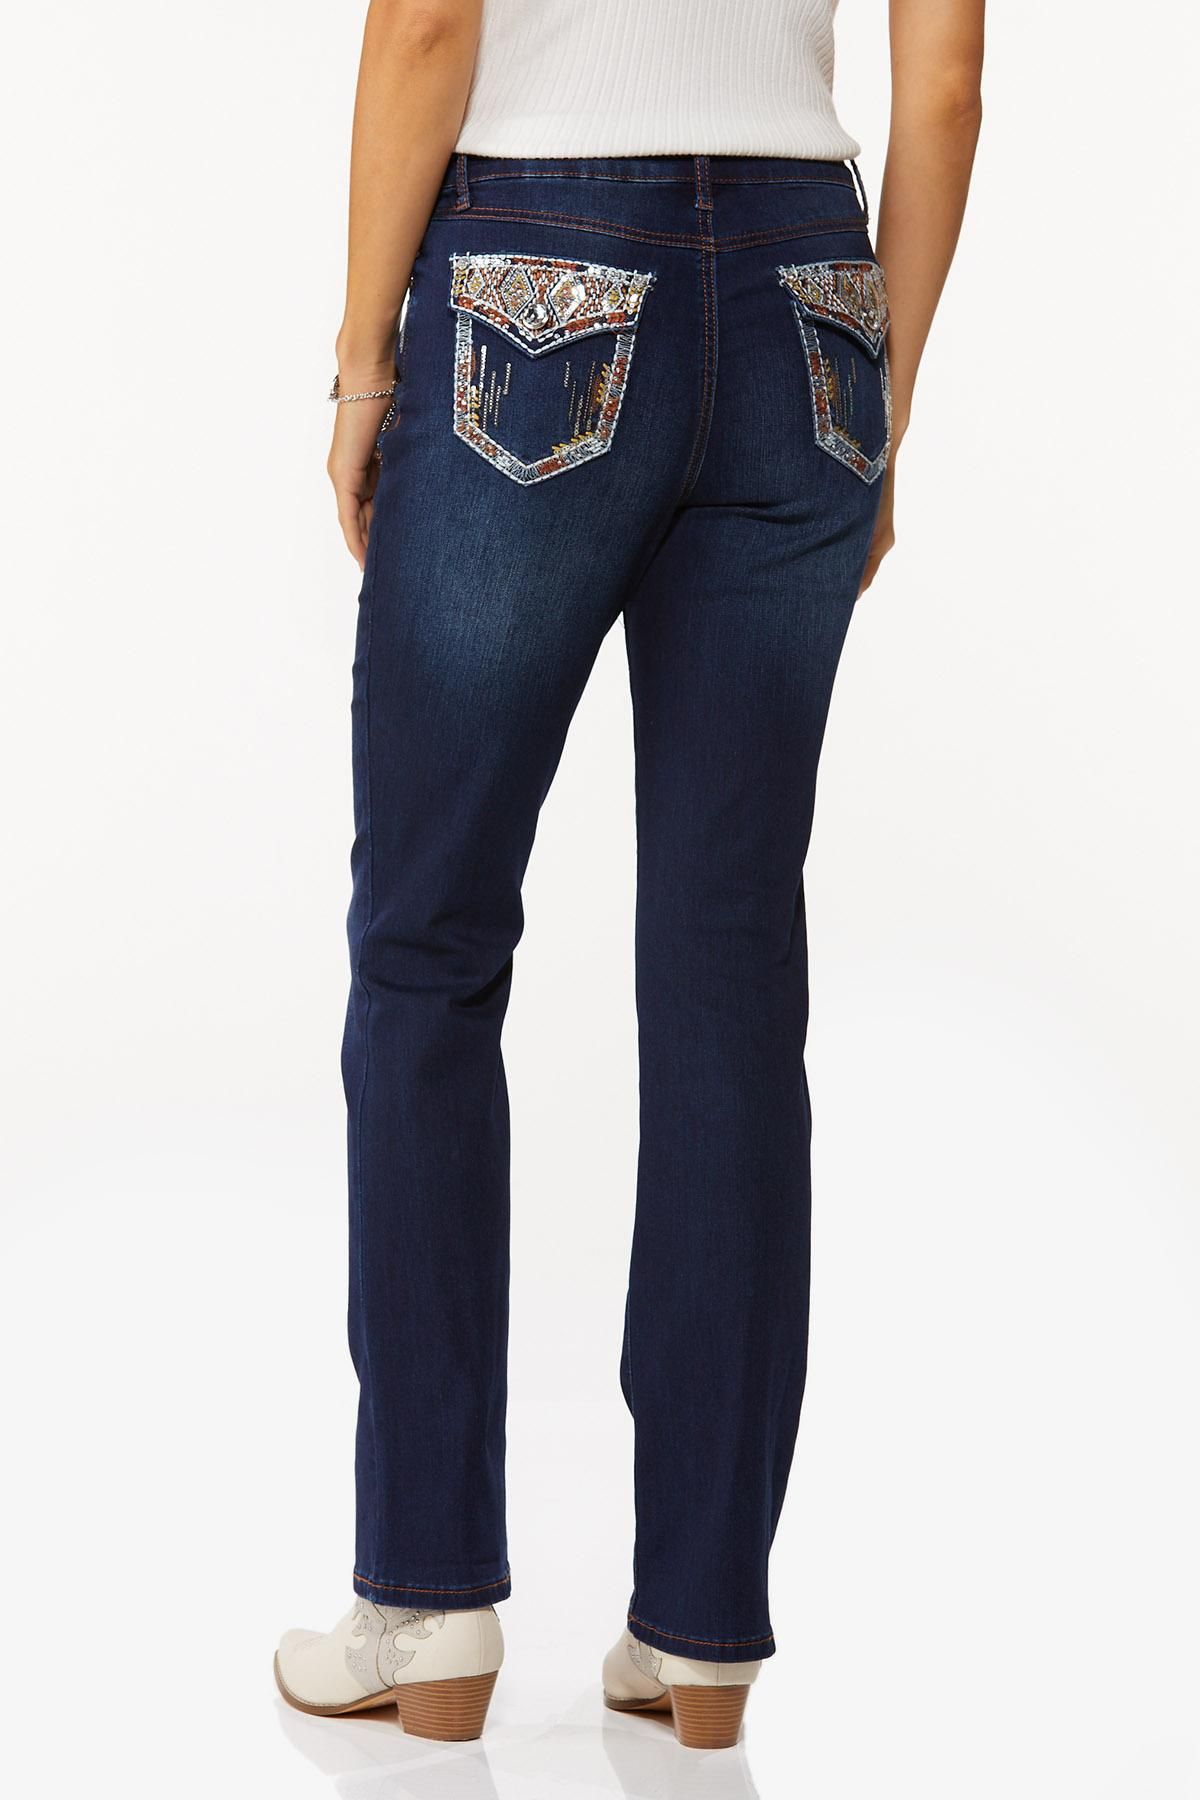 Petite Embellished Bootcut Jeans | Cato Fashions